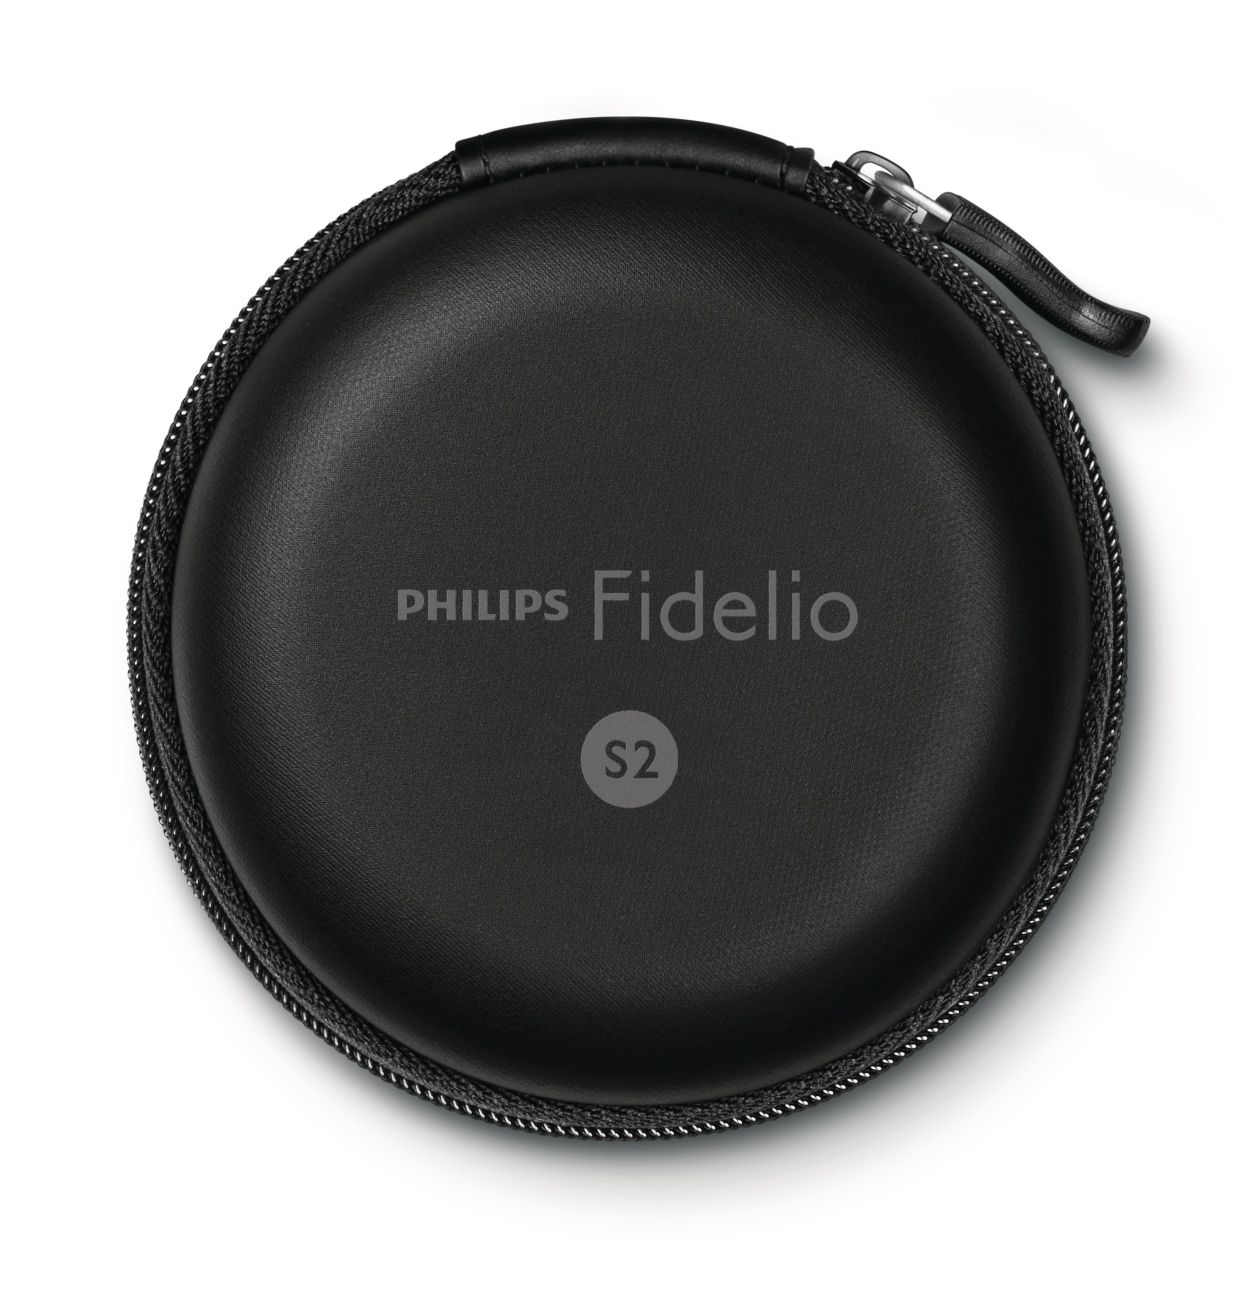 PHILIPS Fidelio S2 Original HIFI Headsets High Resolution Fever Phone Call  Wire Control In-ear Earphone Support Official Test